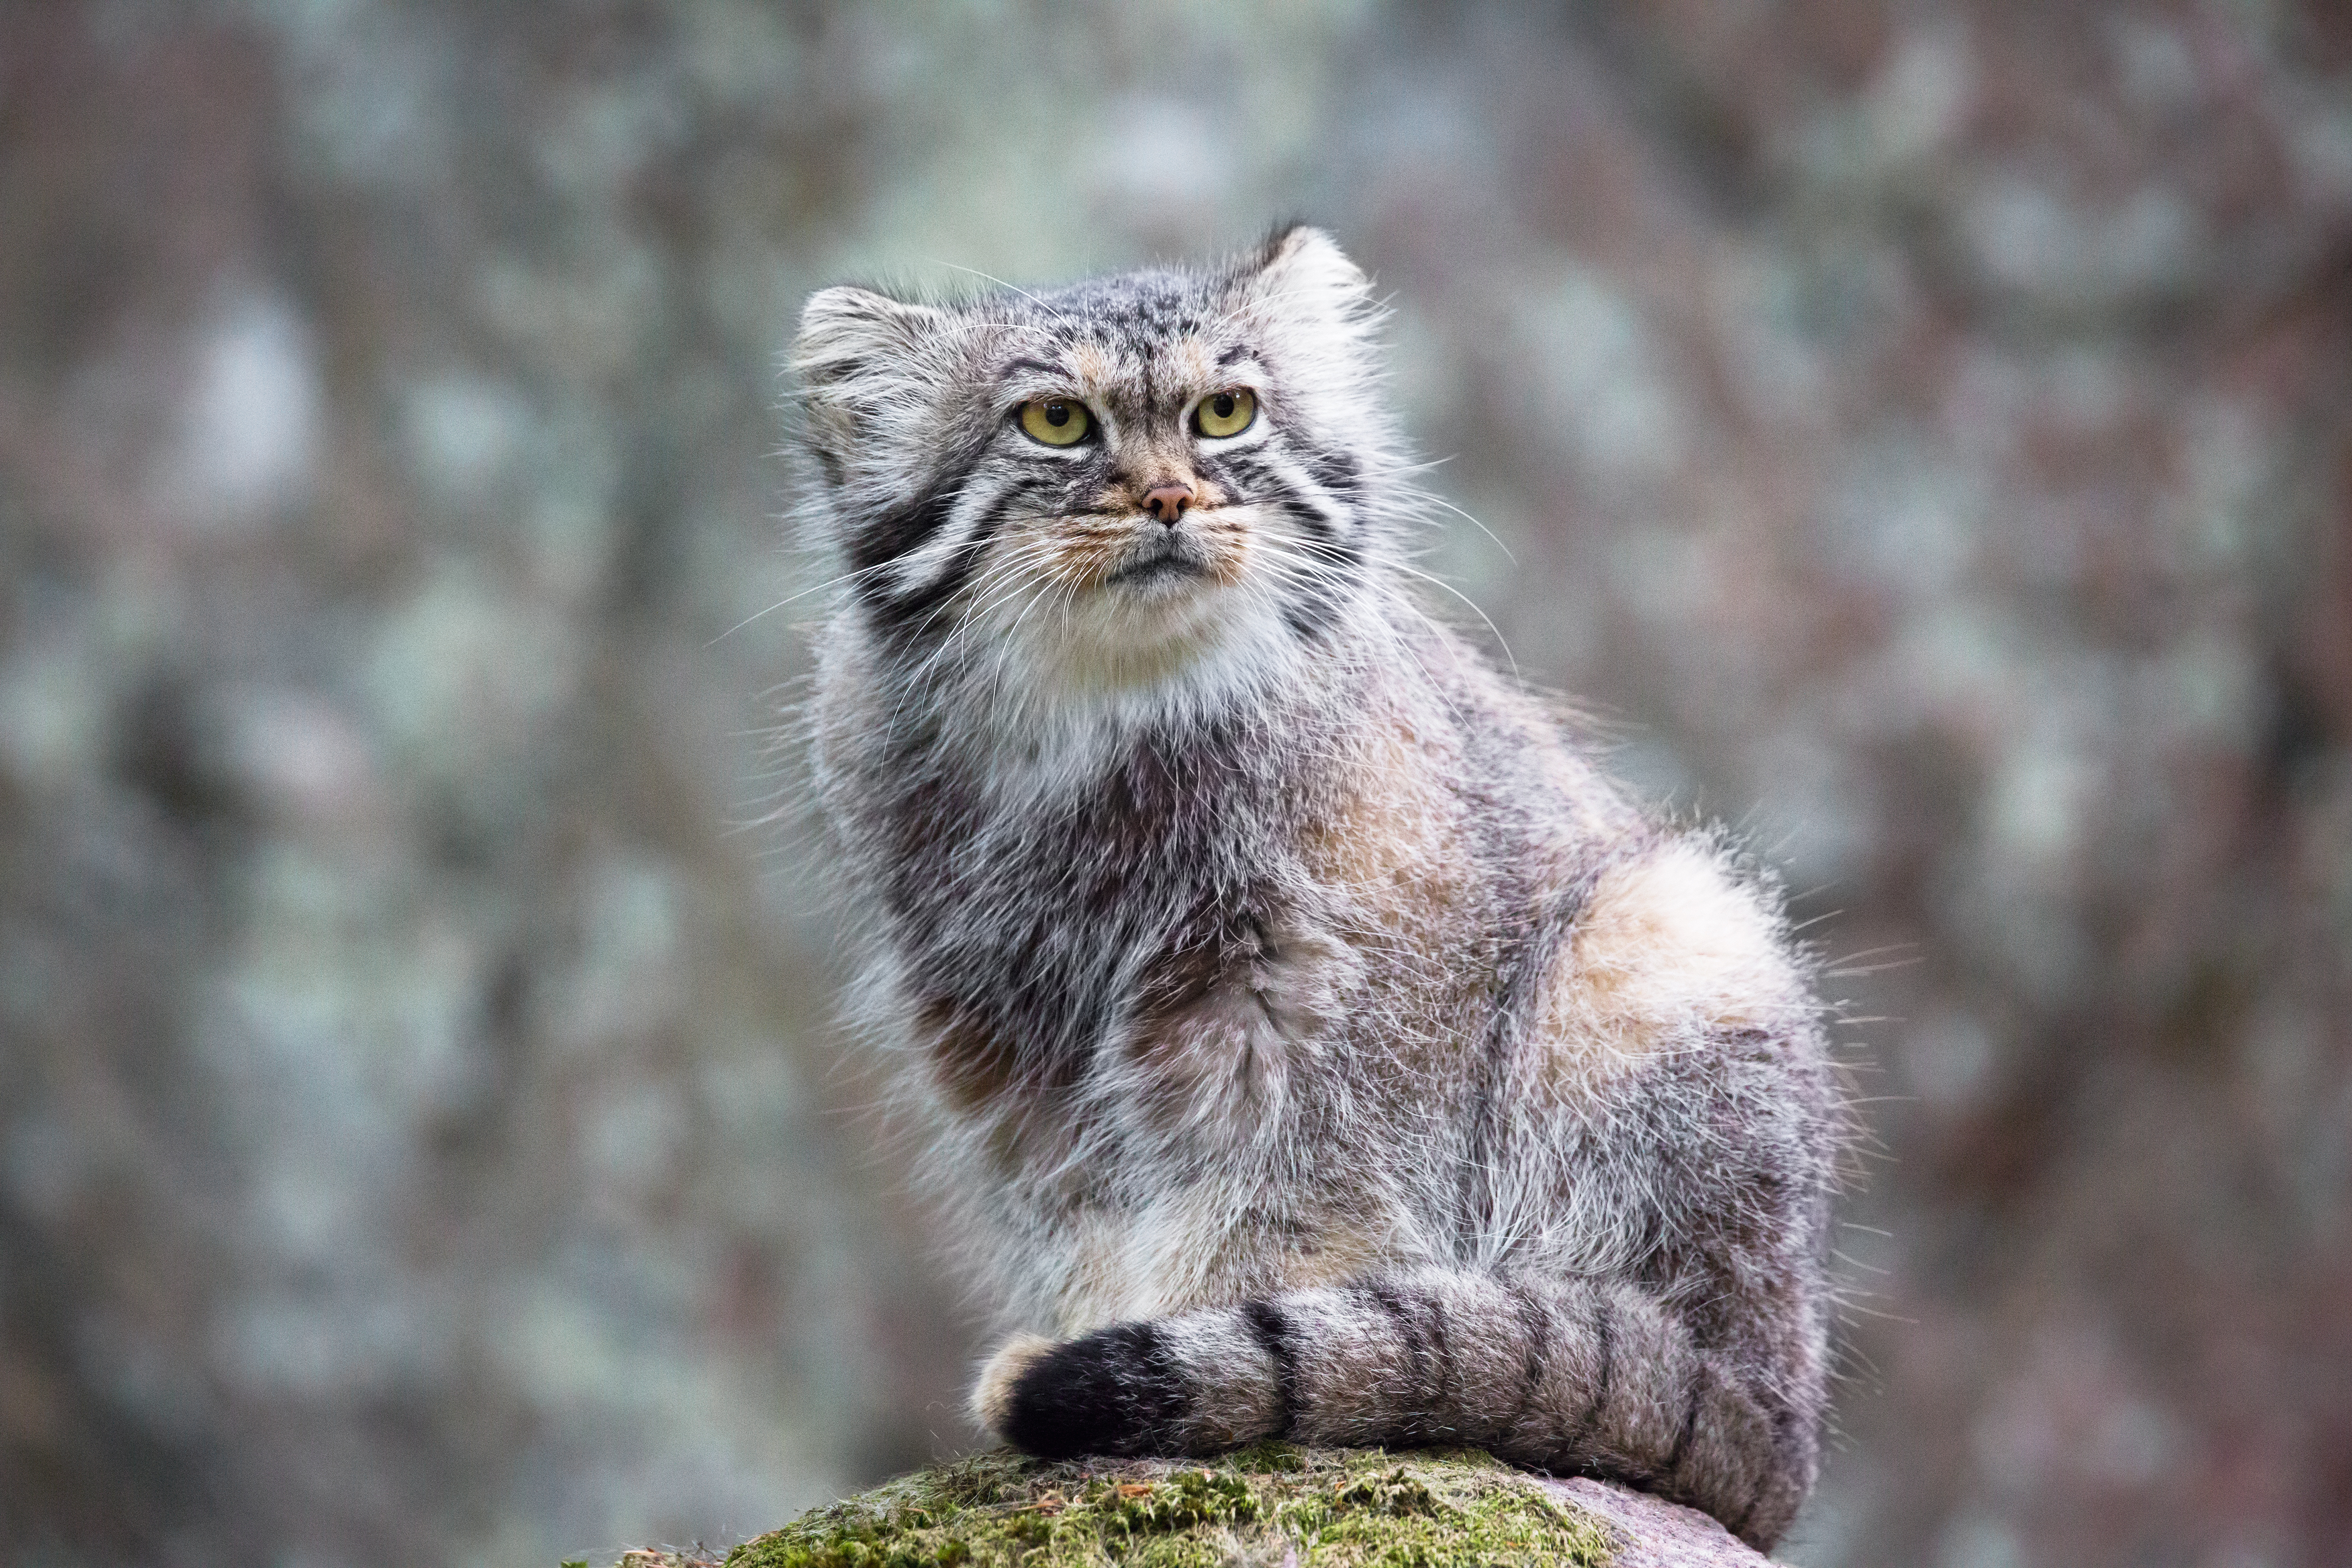 The Creature Feature: 10 Fun Facts About the Pallas' Cat